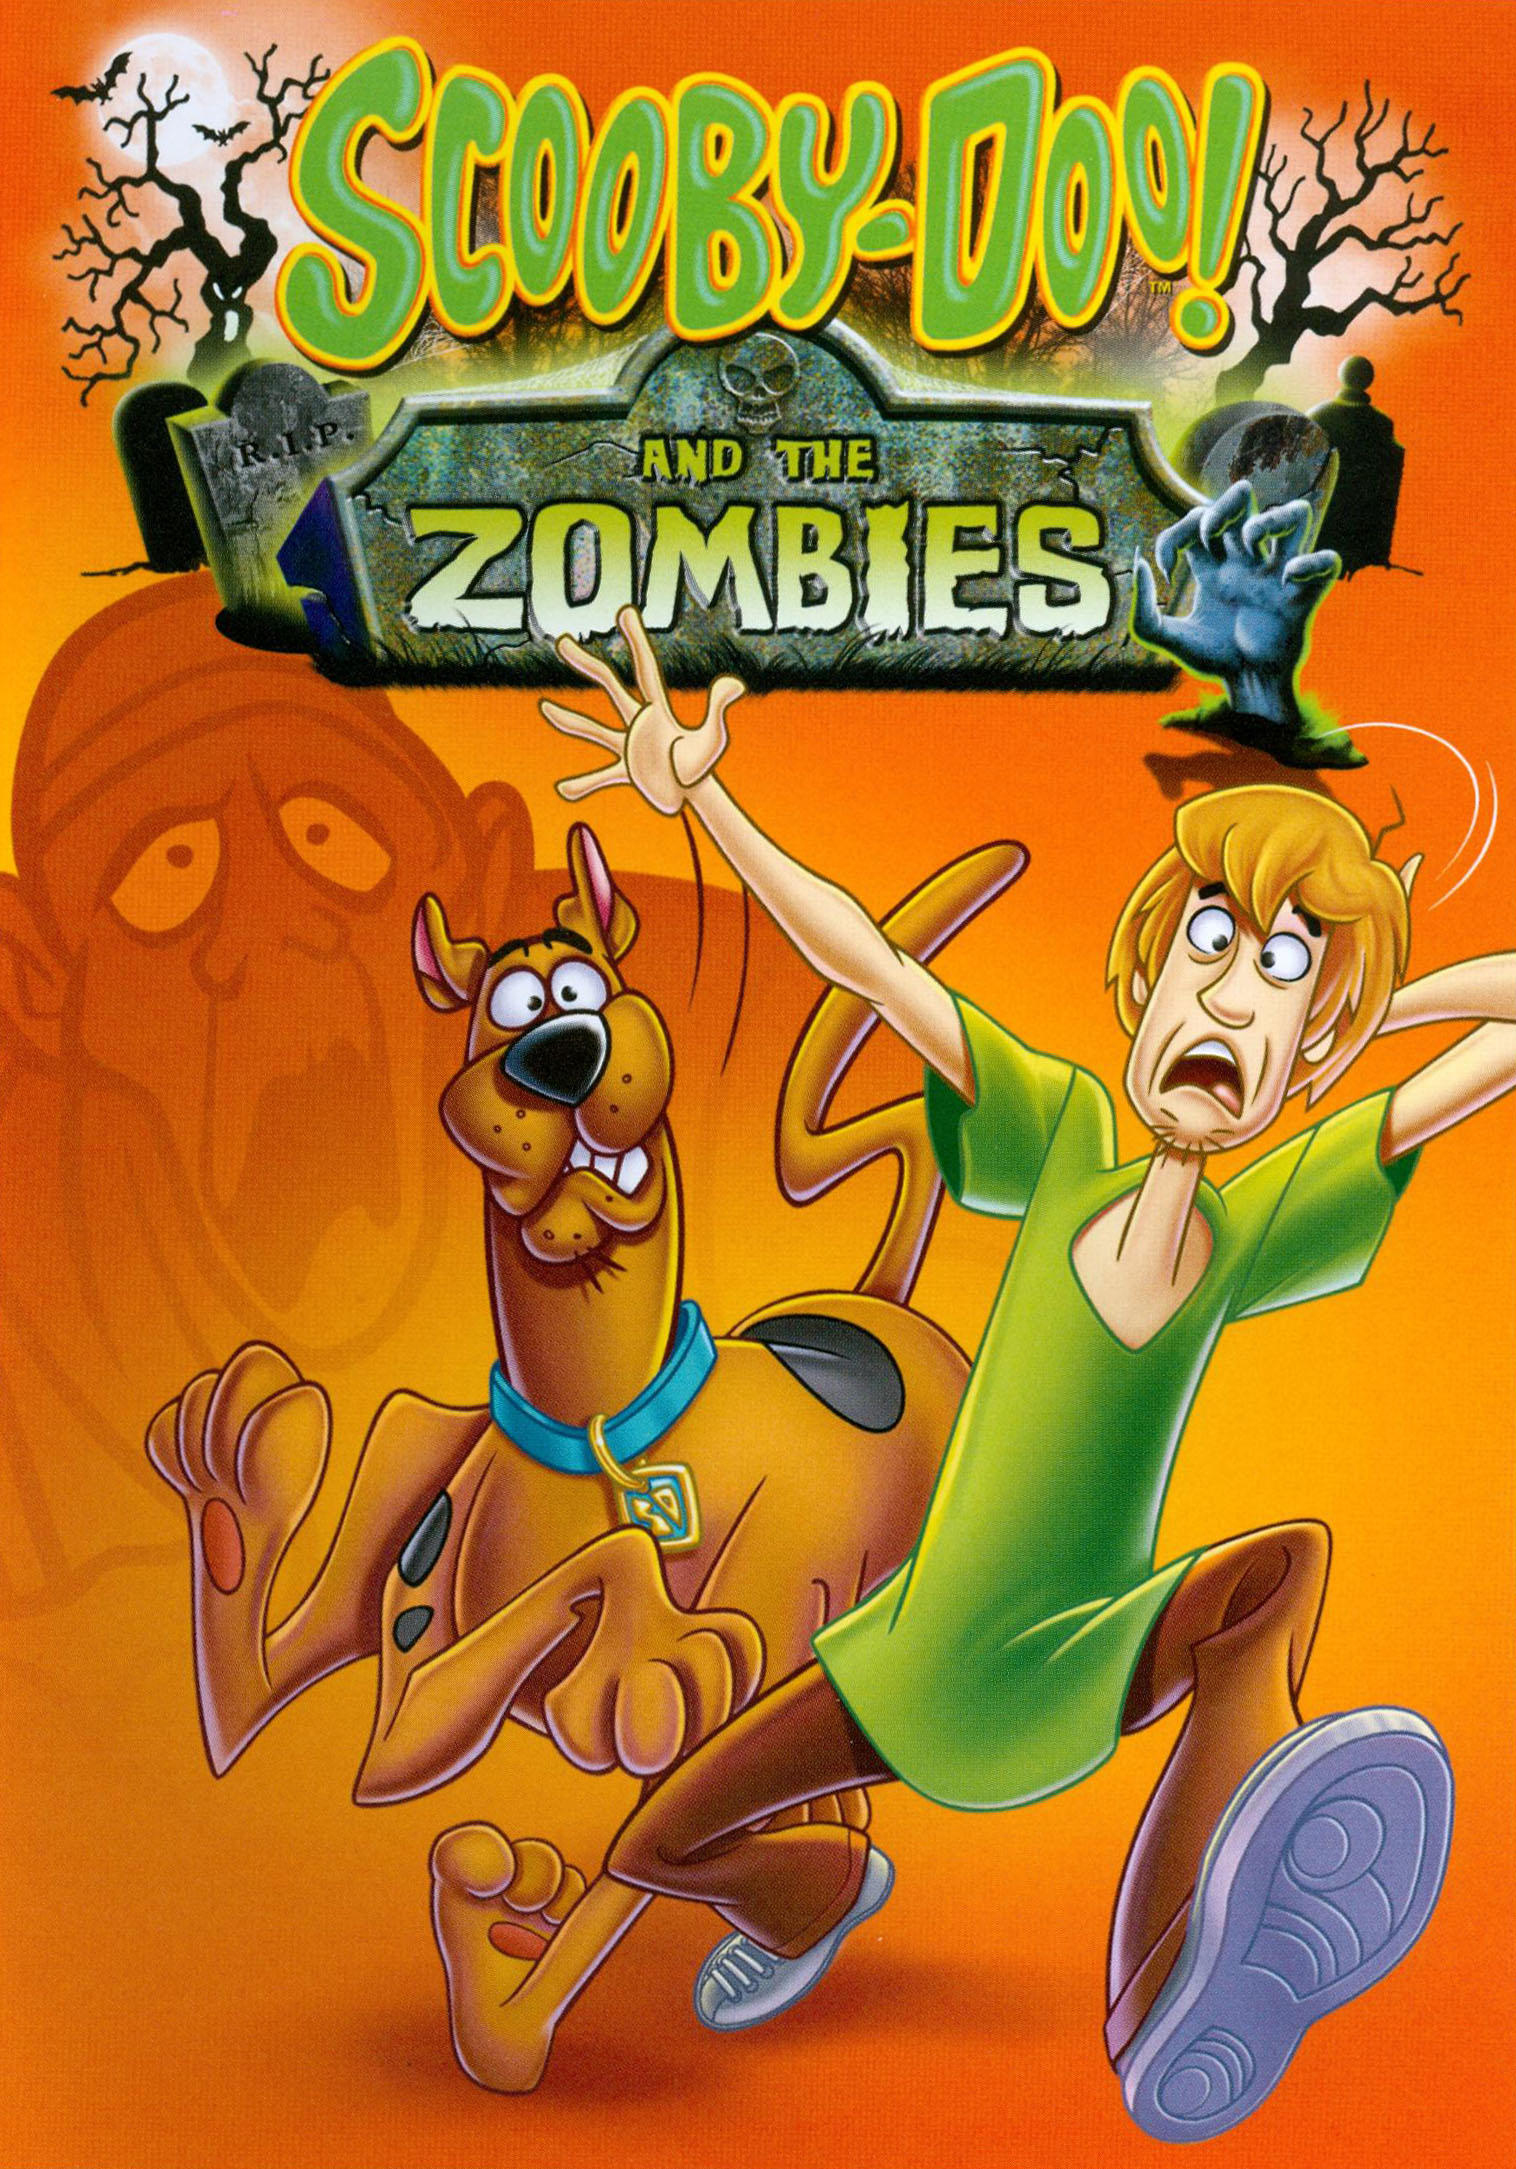  Scooby  Doo  and the Zombies DVD  Best Buy